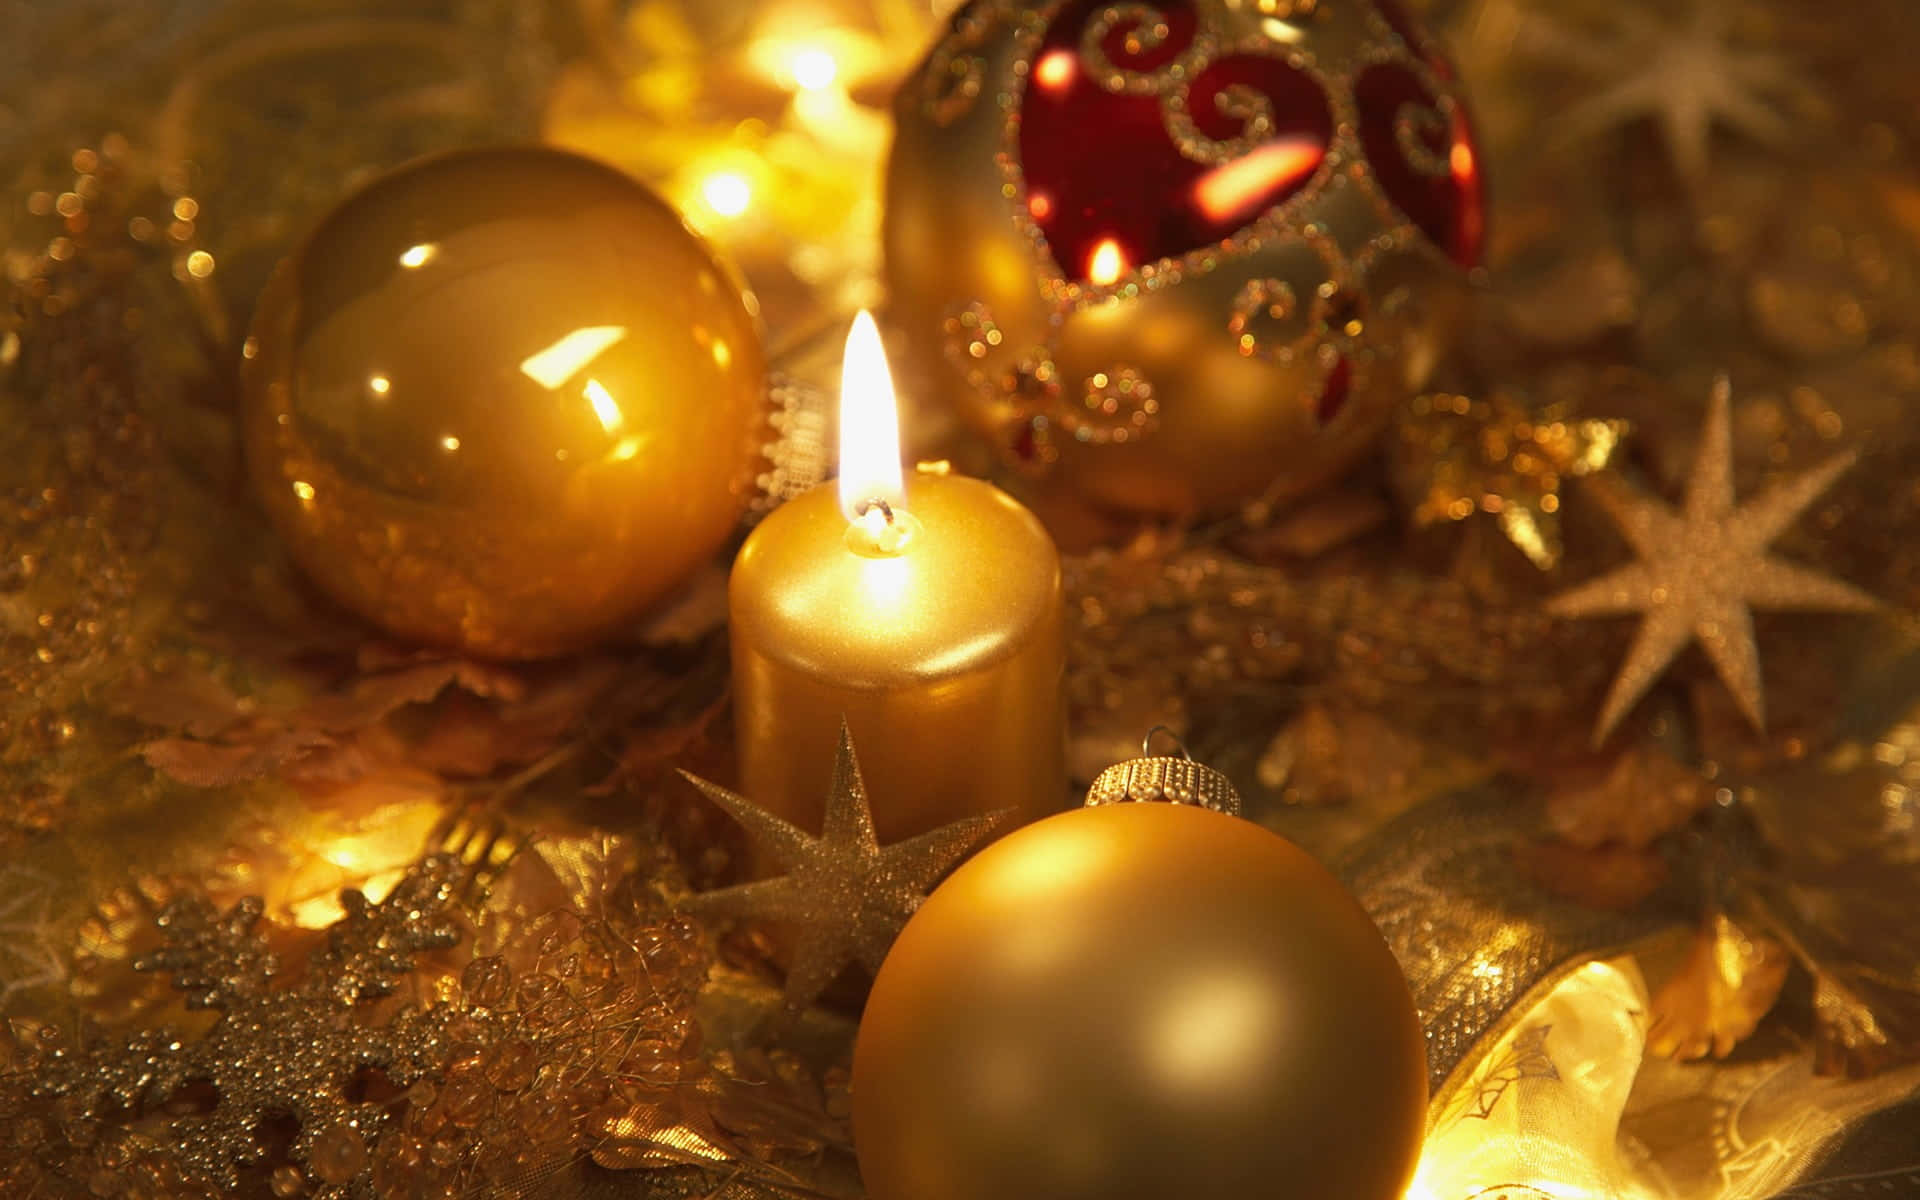 Download Christmas Candle And Ornaments On A Table | Wallpapers.com